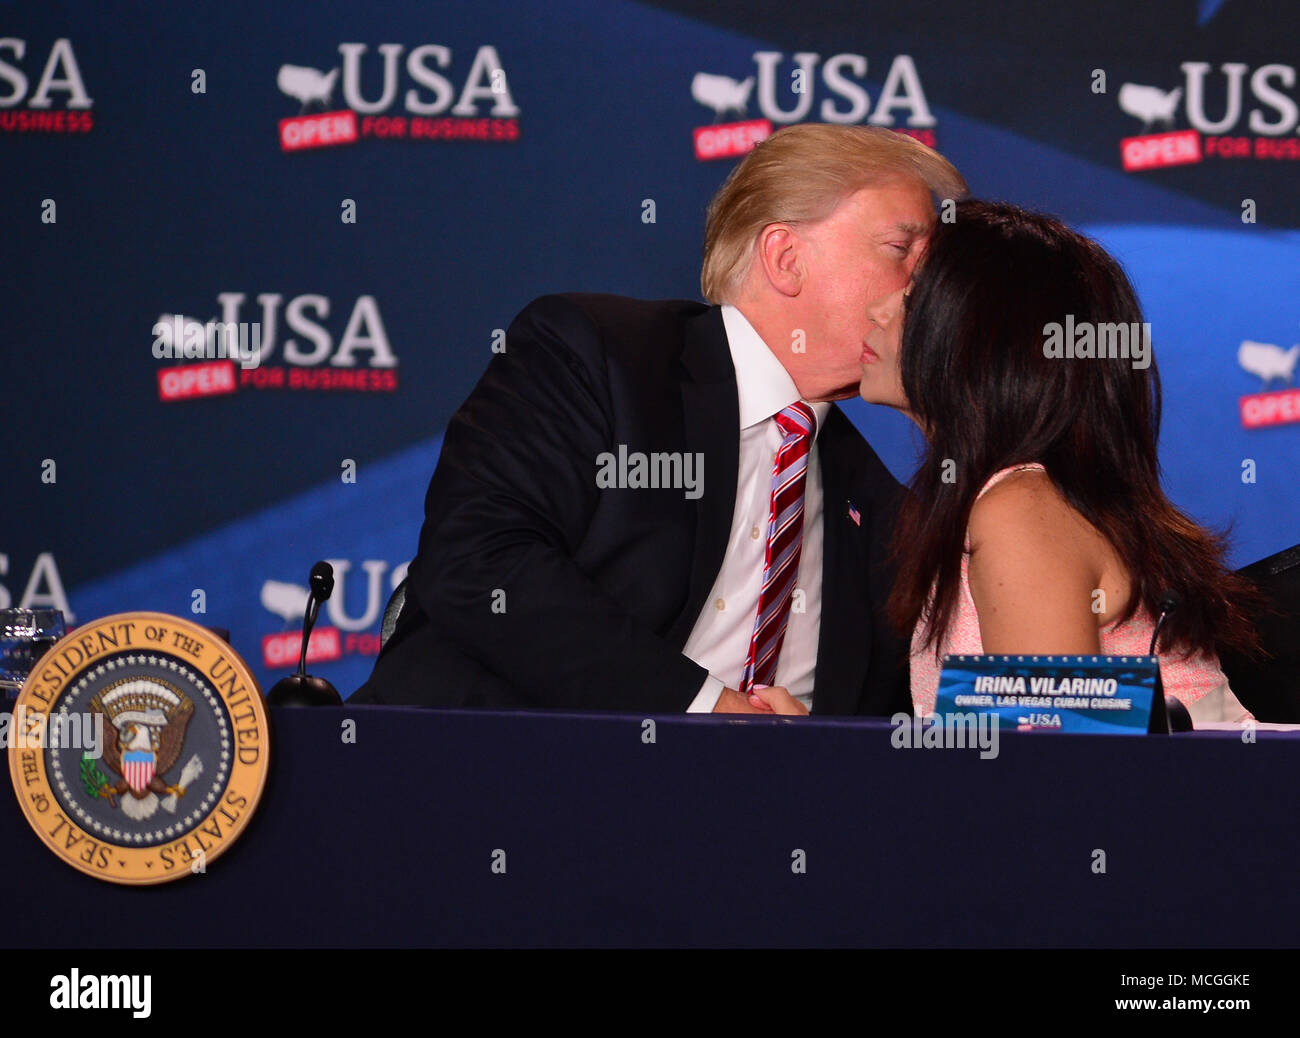 Hialeah, FL, USA. 16th Apr, 2018. U.S. President Donald J. Trump giving Irena Vilarino a kiss on the cheek while taking part in a roundtable discussion on tax cuts reform for Florida Small Businesses at Bucky Dent Park Gymnasium on April 16, 2018 in Hialeah, Florida. Credit: Mpi10/Media Punch/Alamy Live News Stock Photo